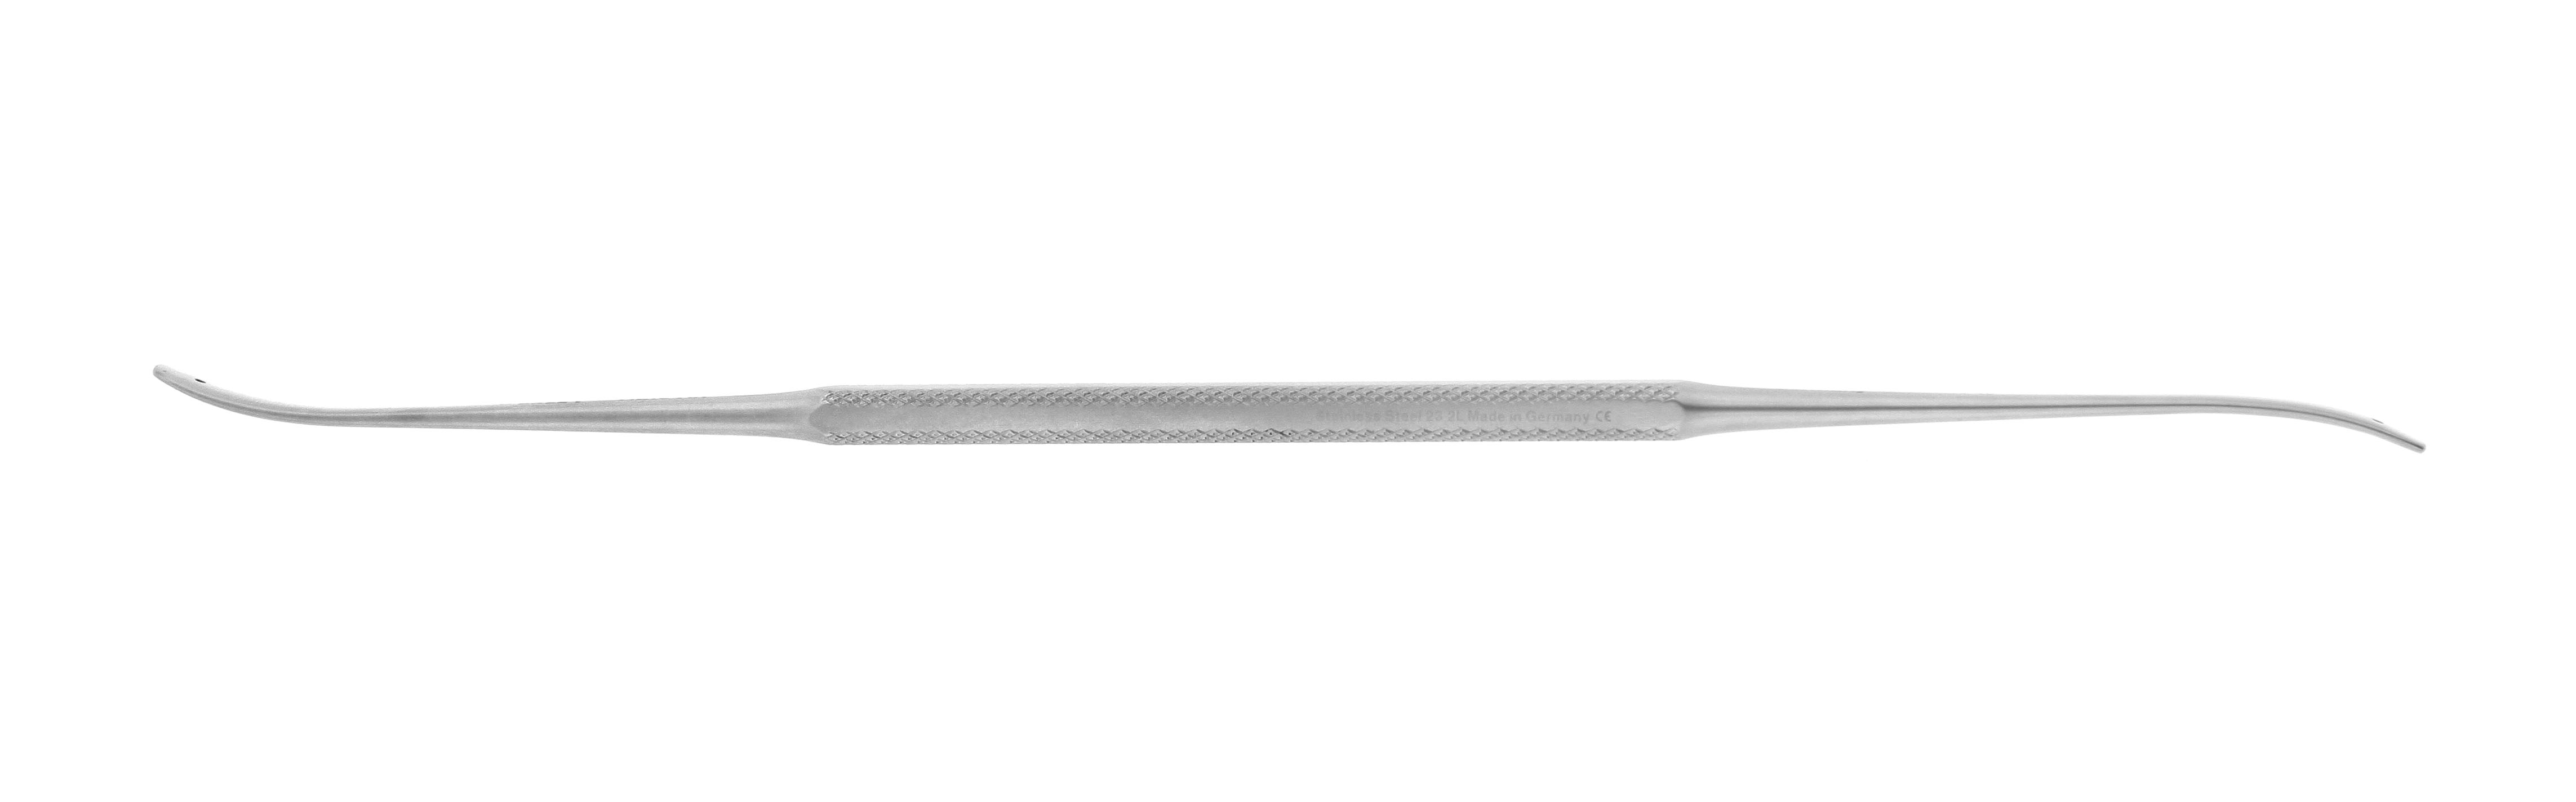 Olivecrona Double Ended Dissector - Regular (4mm x 5mm)